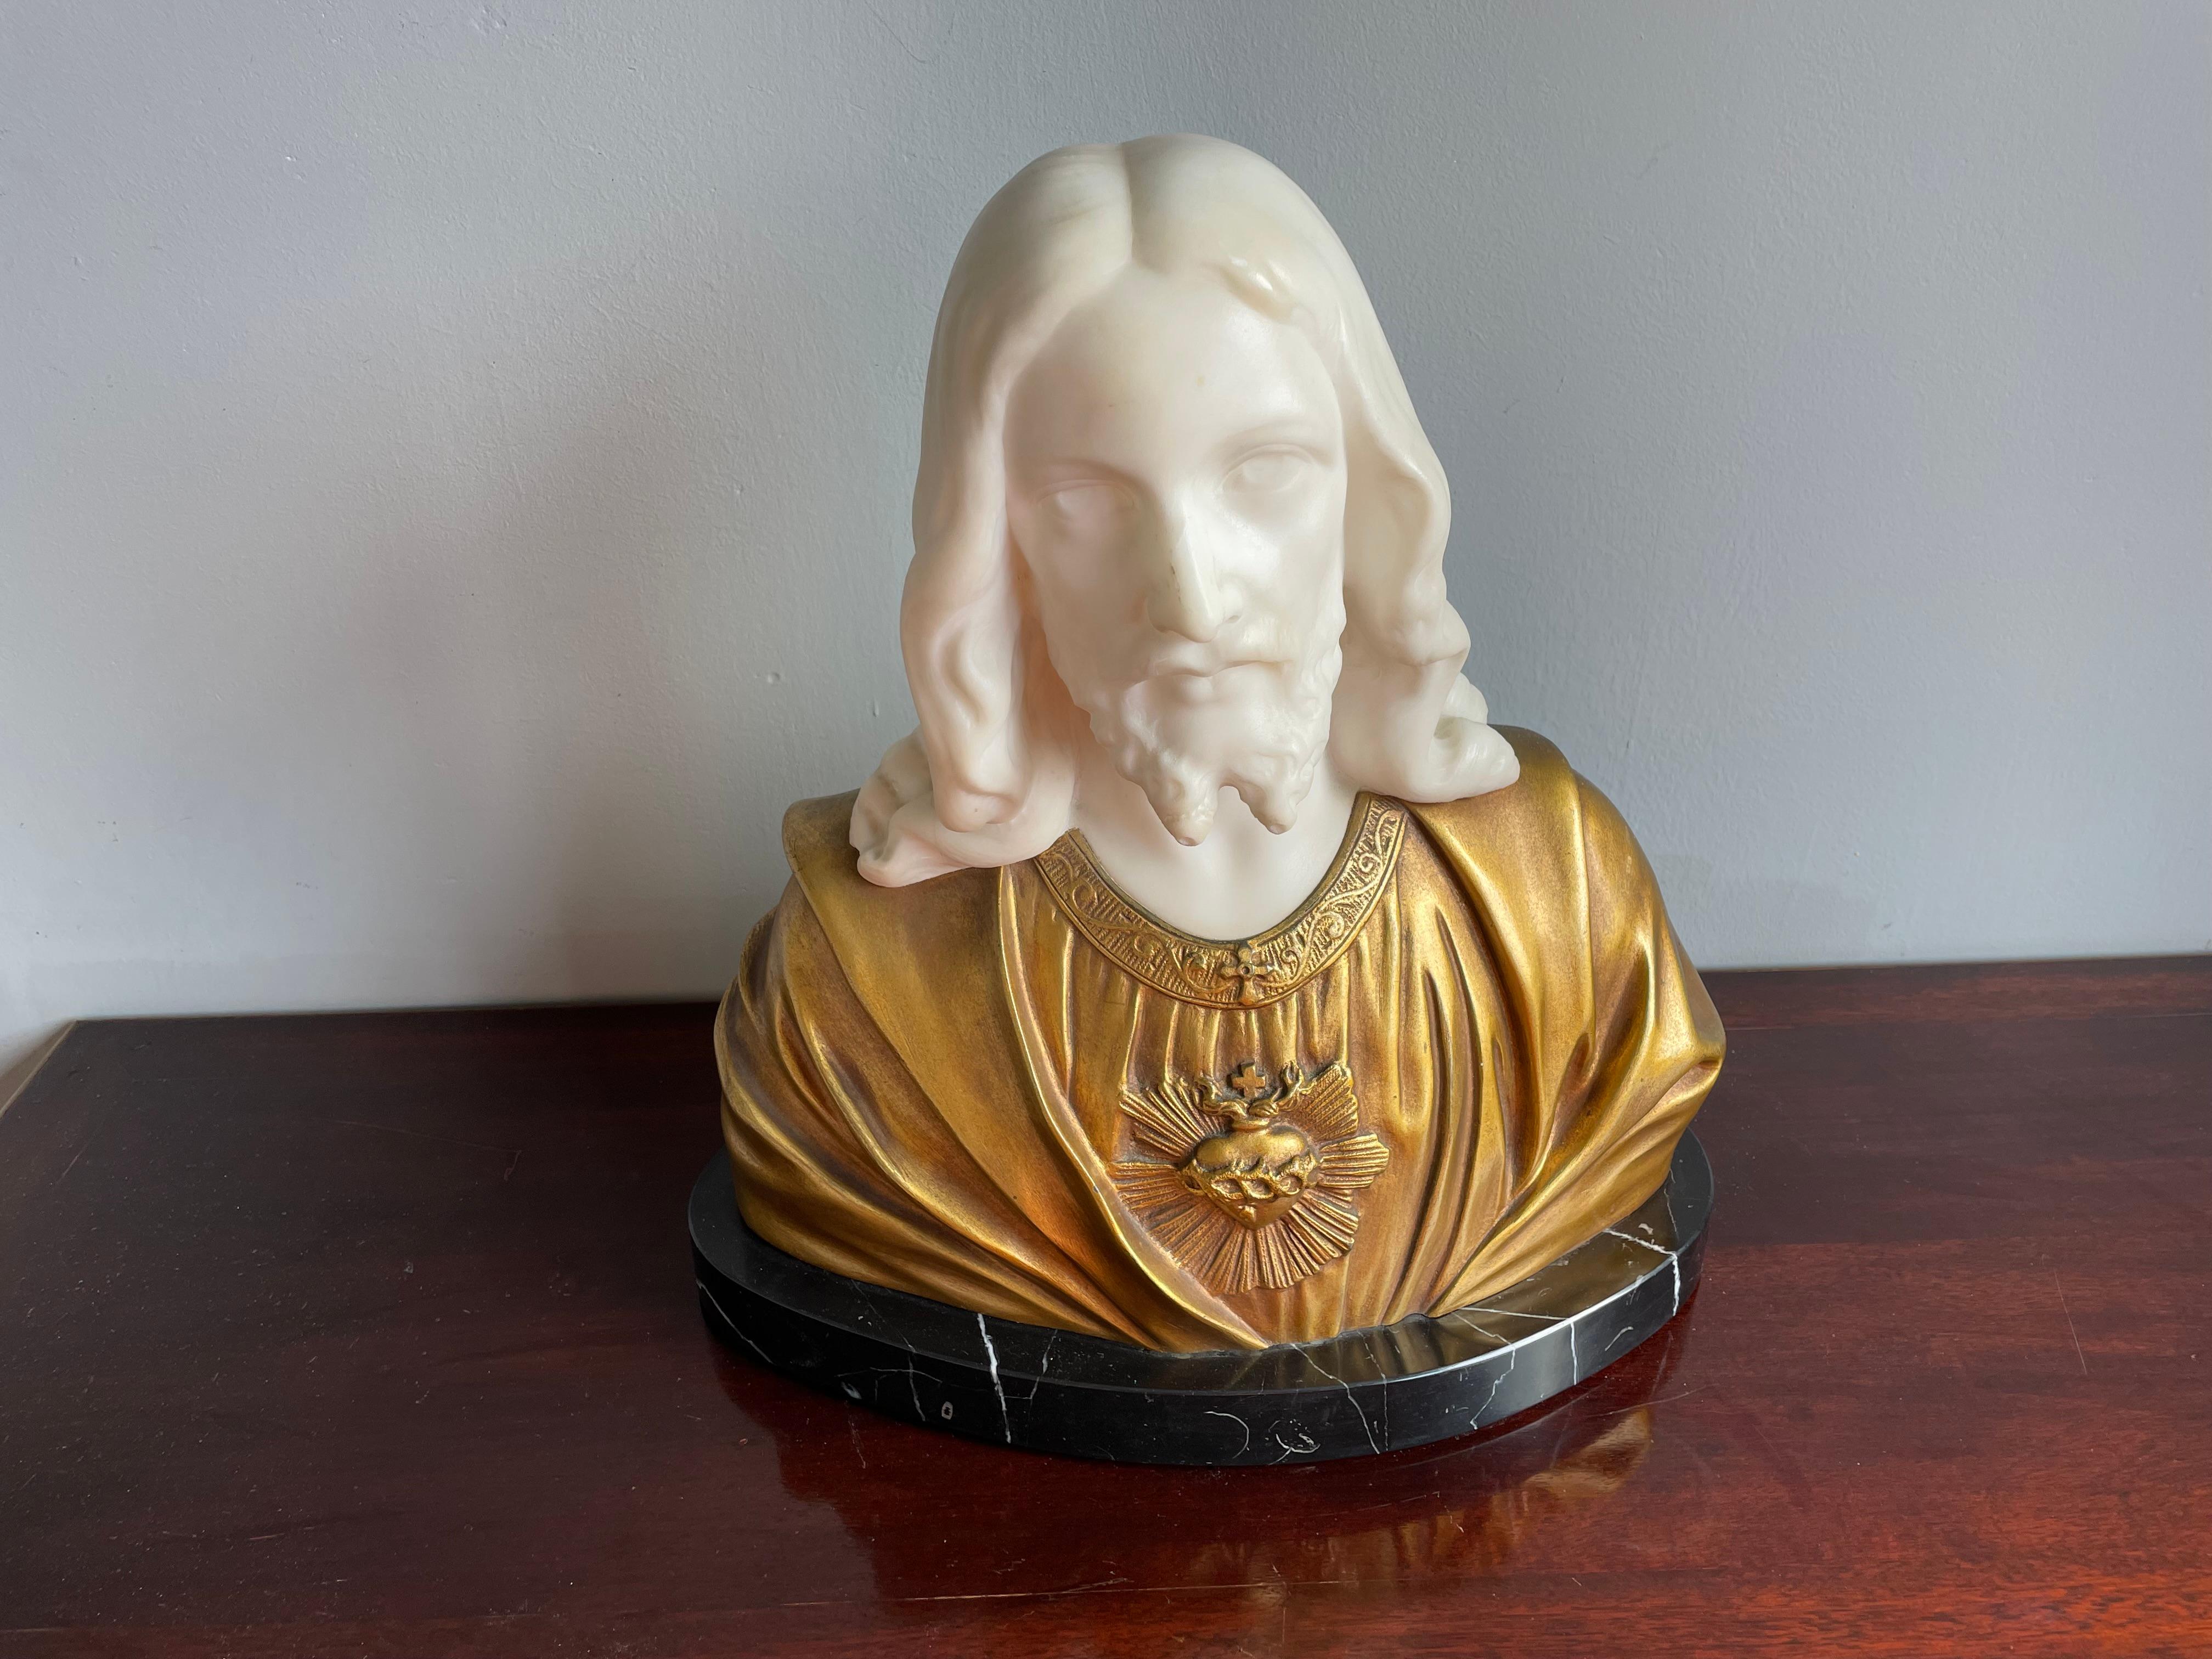 Unique and antique alabaster and bronze sculpture of our Lord Jesus by G. Parentani.

This gorgeous and sizeable sculpture is signed on the back by Belgian sculptor G. Parentani who is clearly of Italian descent. With most of our antique alabaster